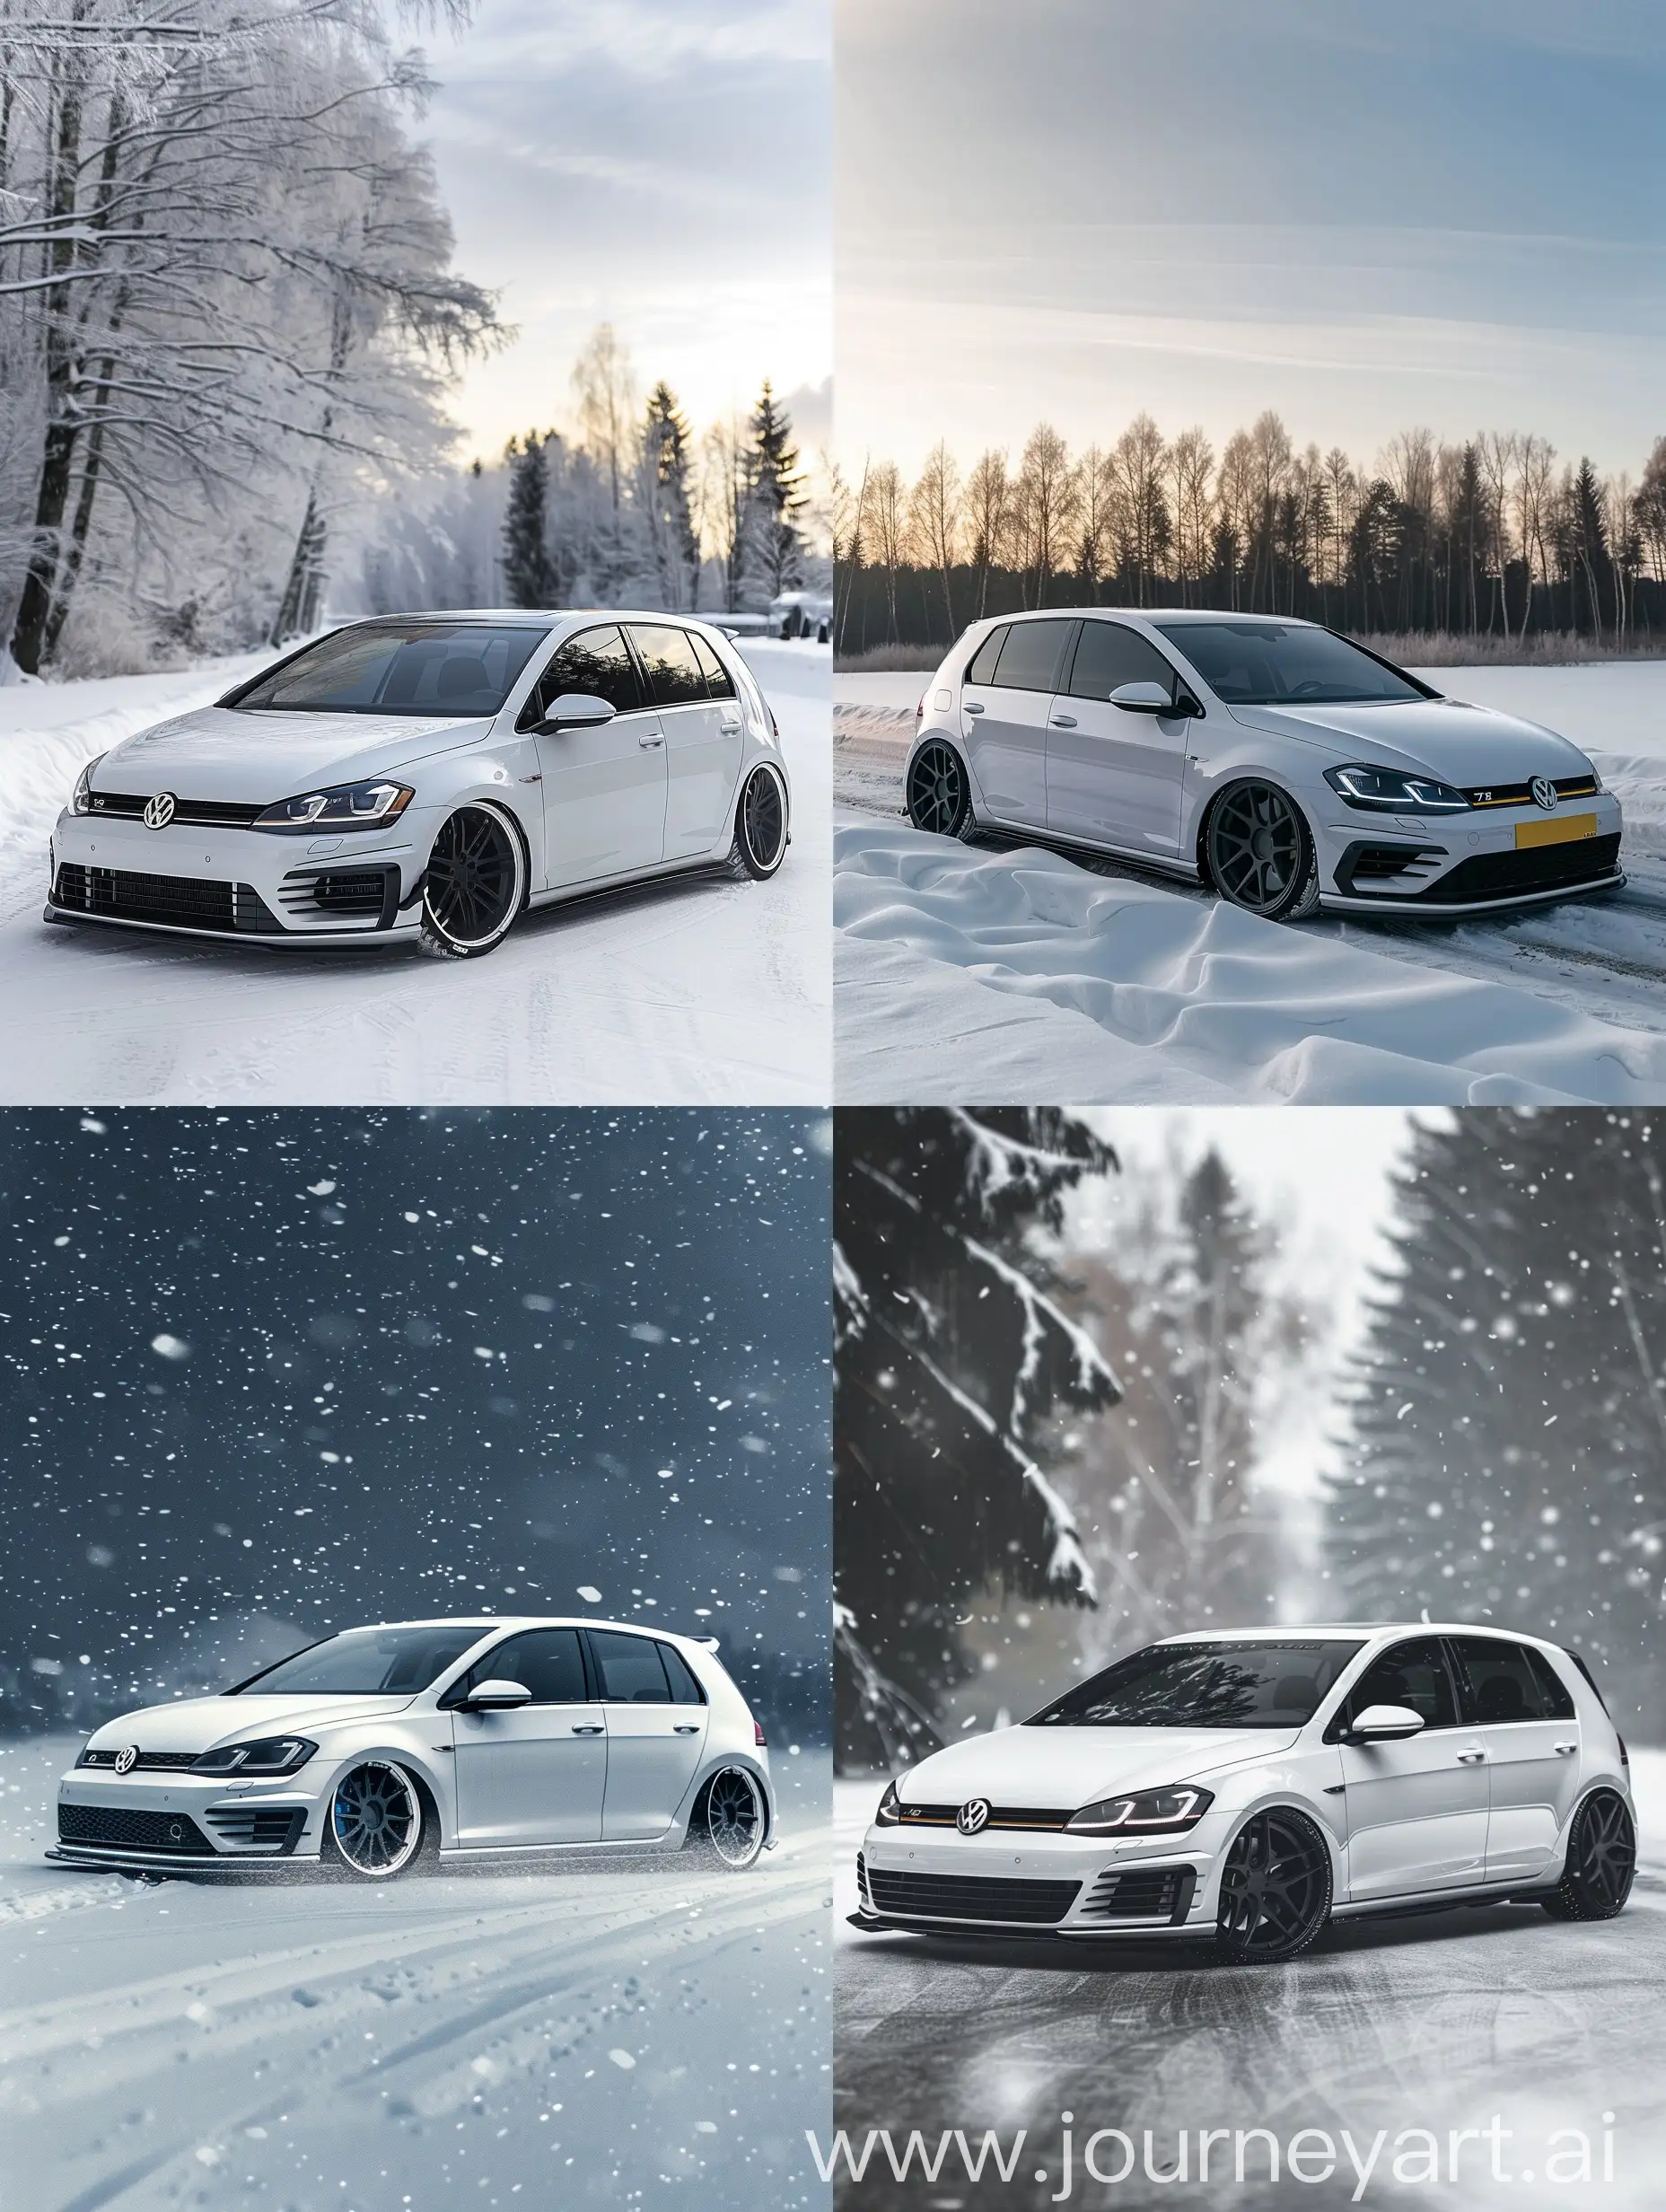 White-Volkswagen-Golf-75R-with-Black-Rims-in-Snowy-Background-Realistic-Instagram-Style-Photo